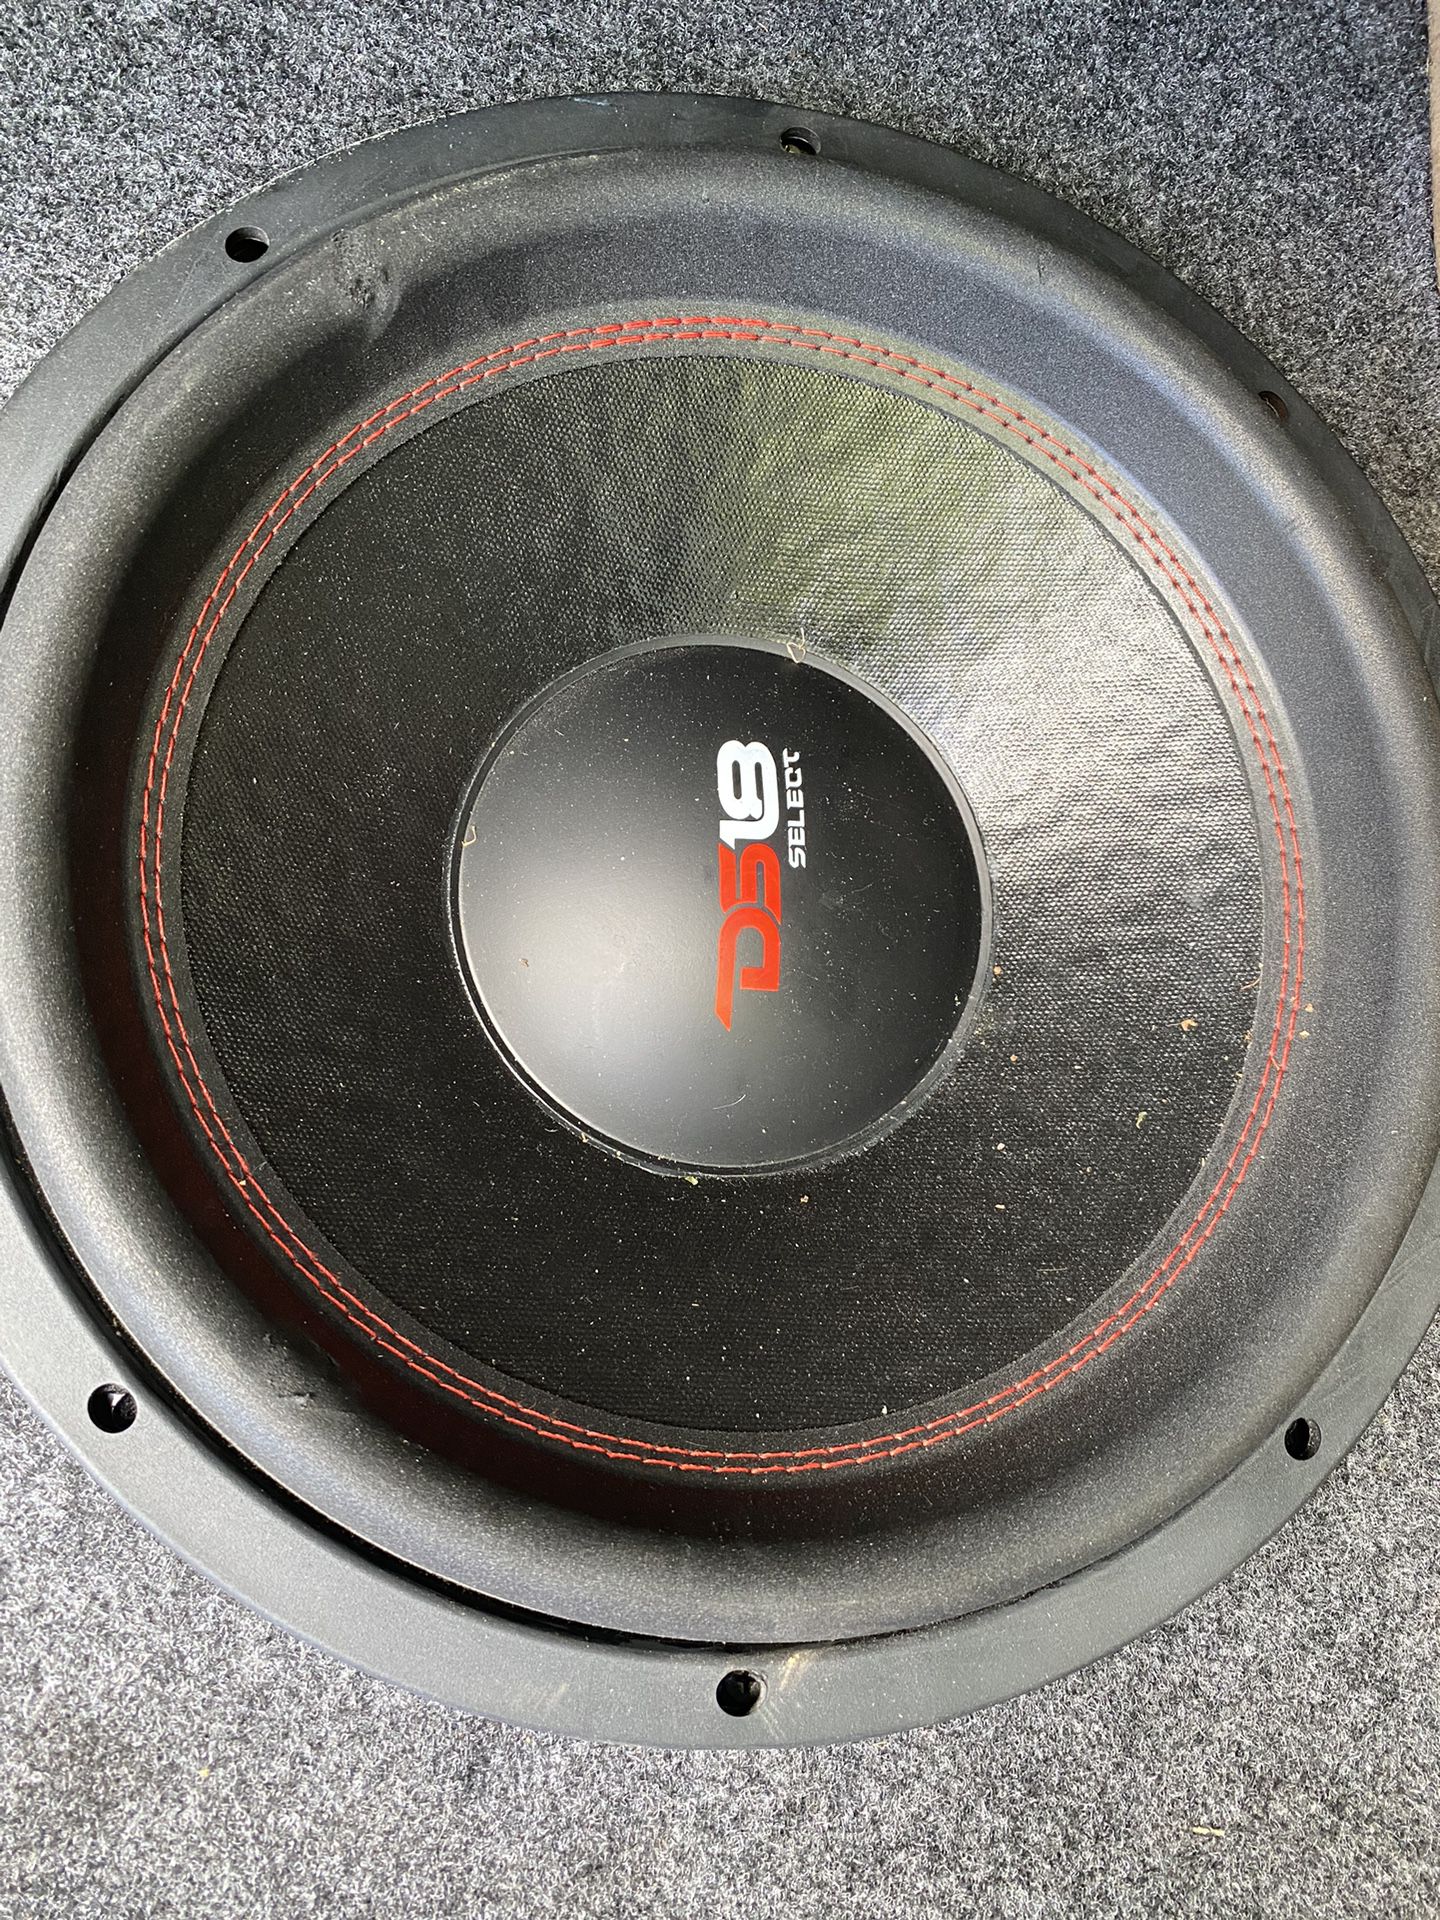 2 12s Ds18 Subwoofers Solid box